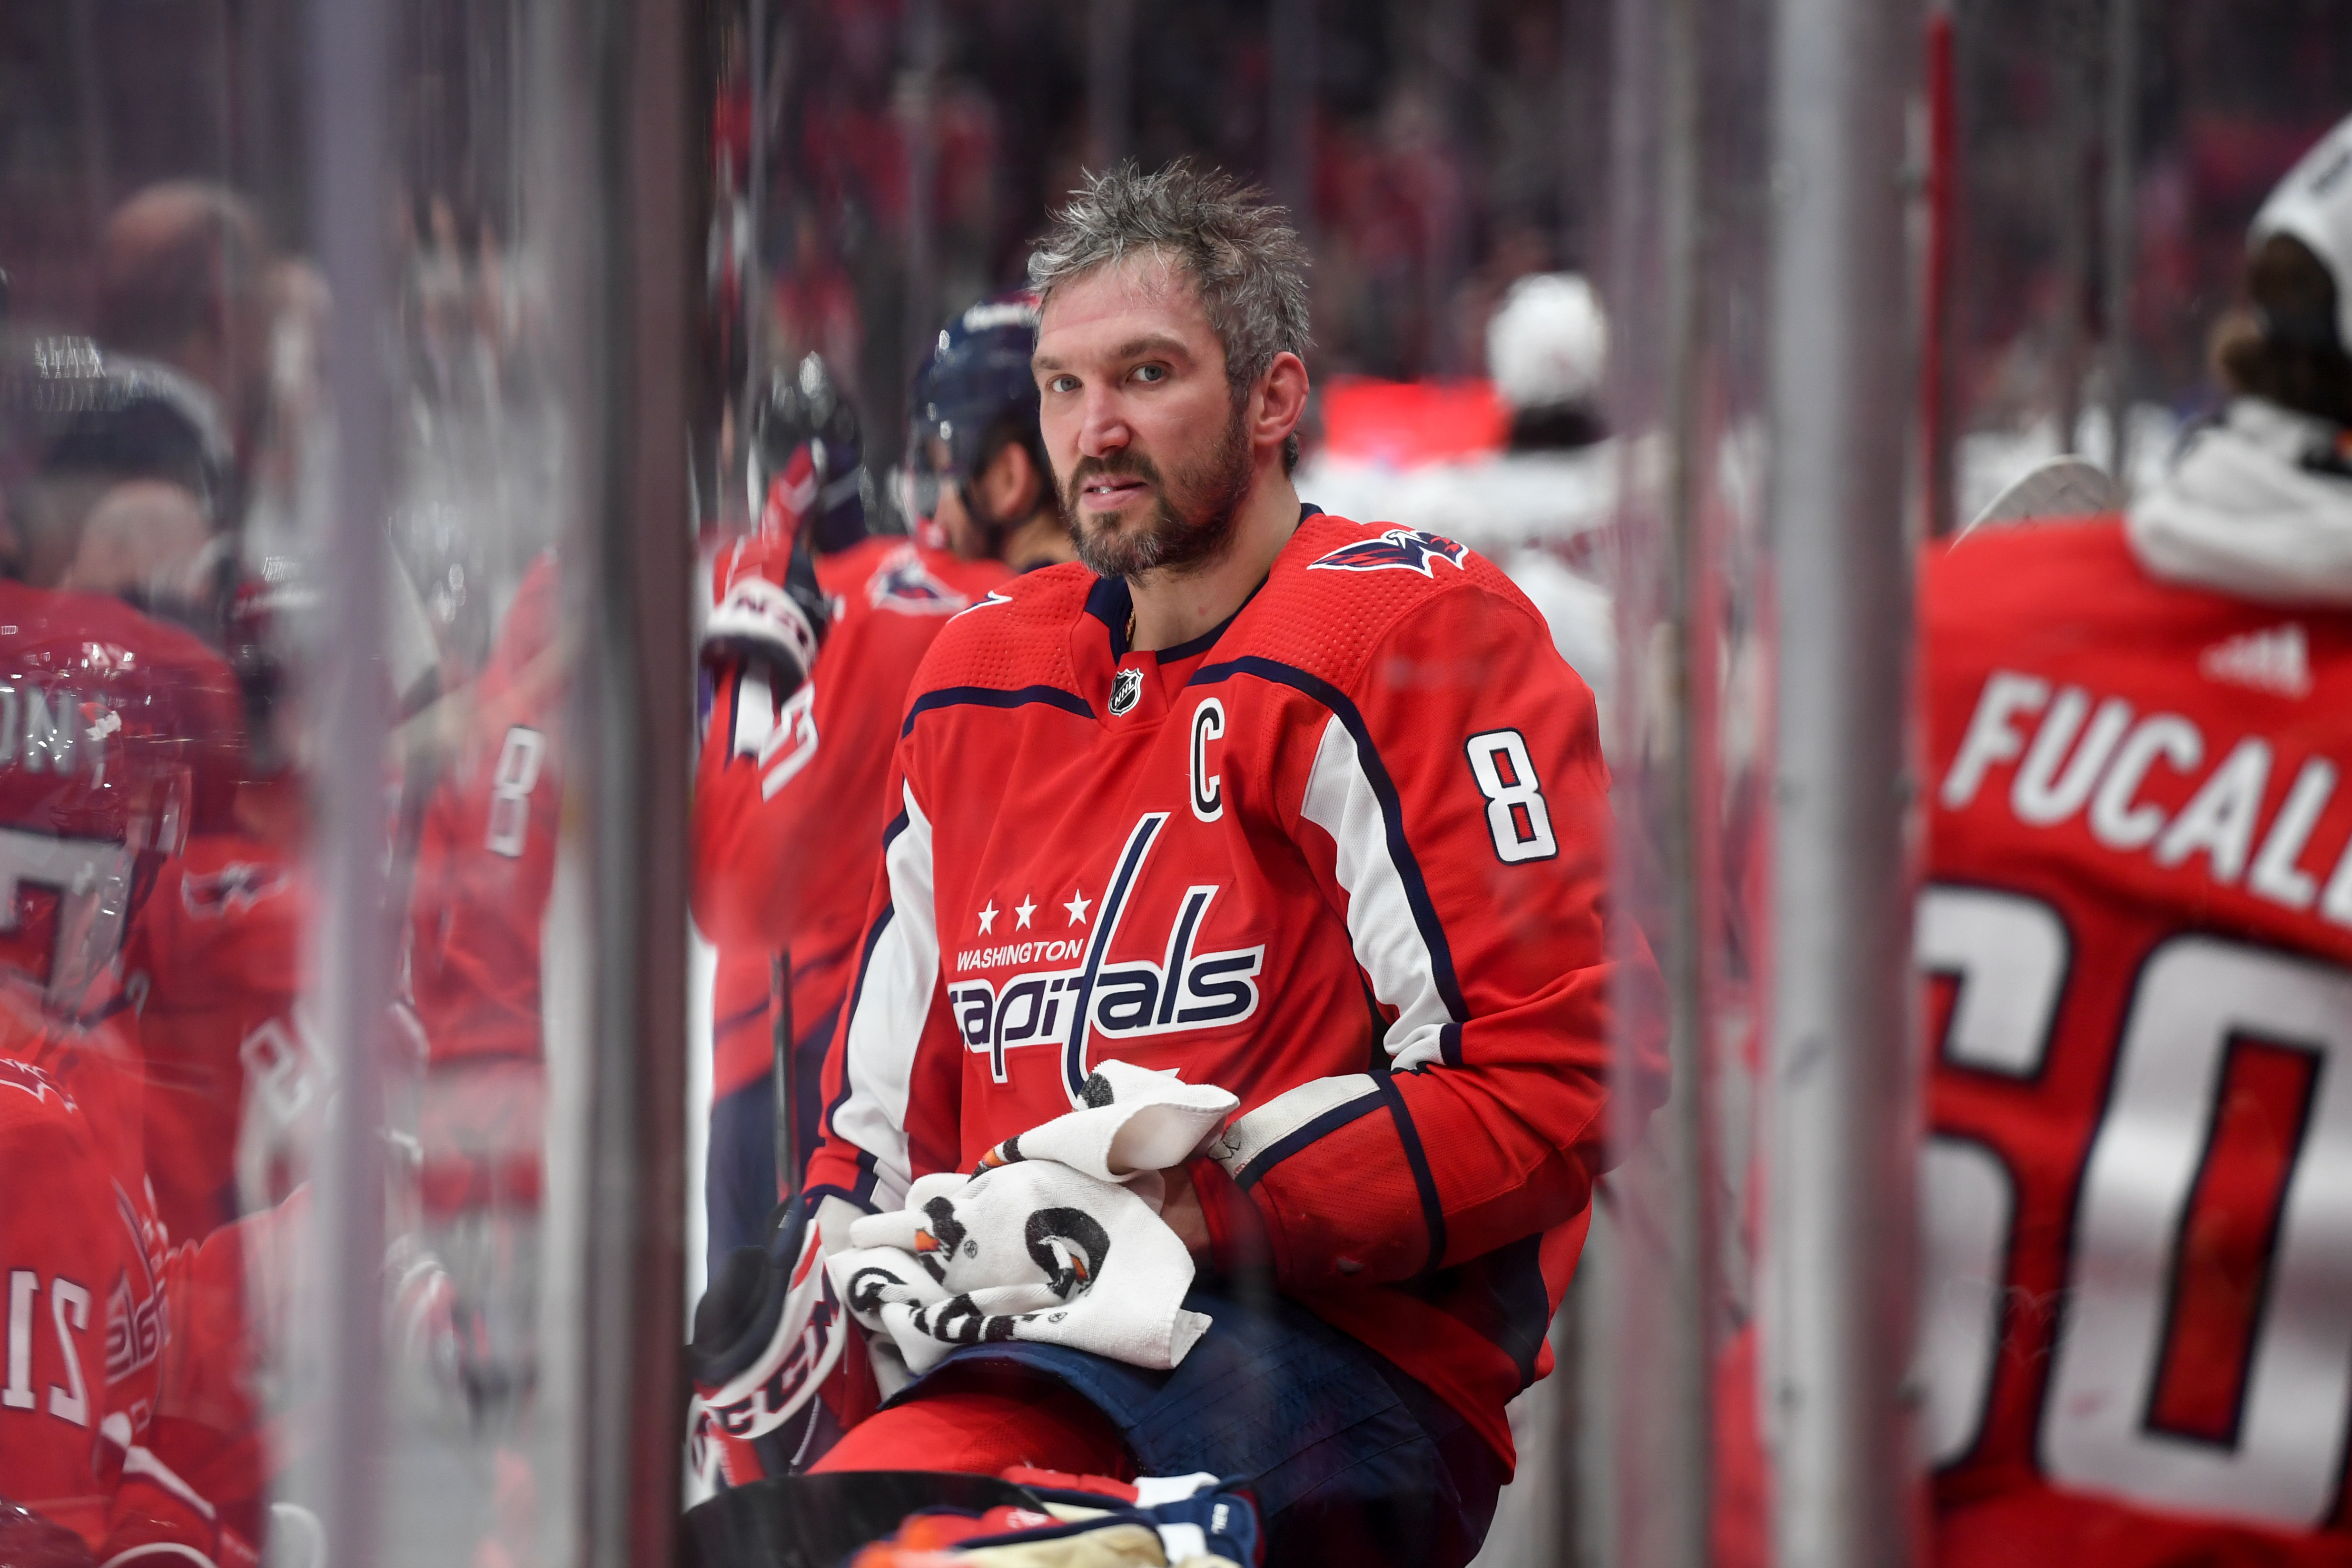 Check Alex Ovechkin for his Putin boosterism – New York Daily News